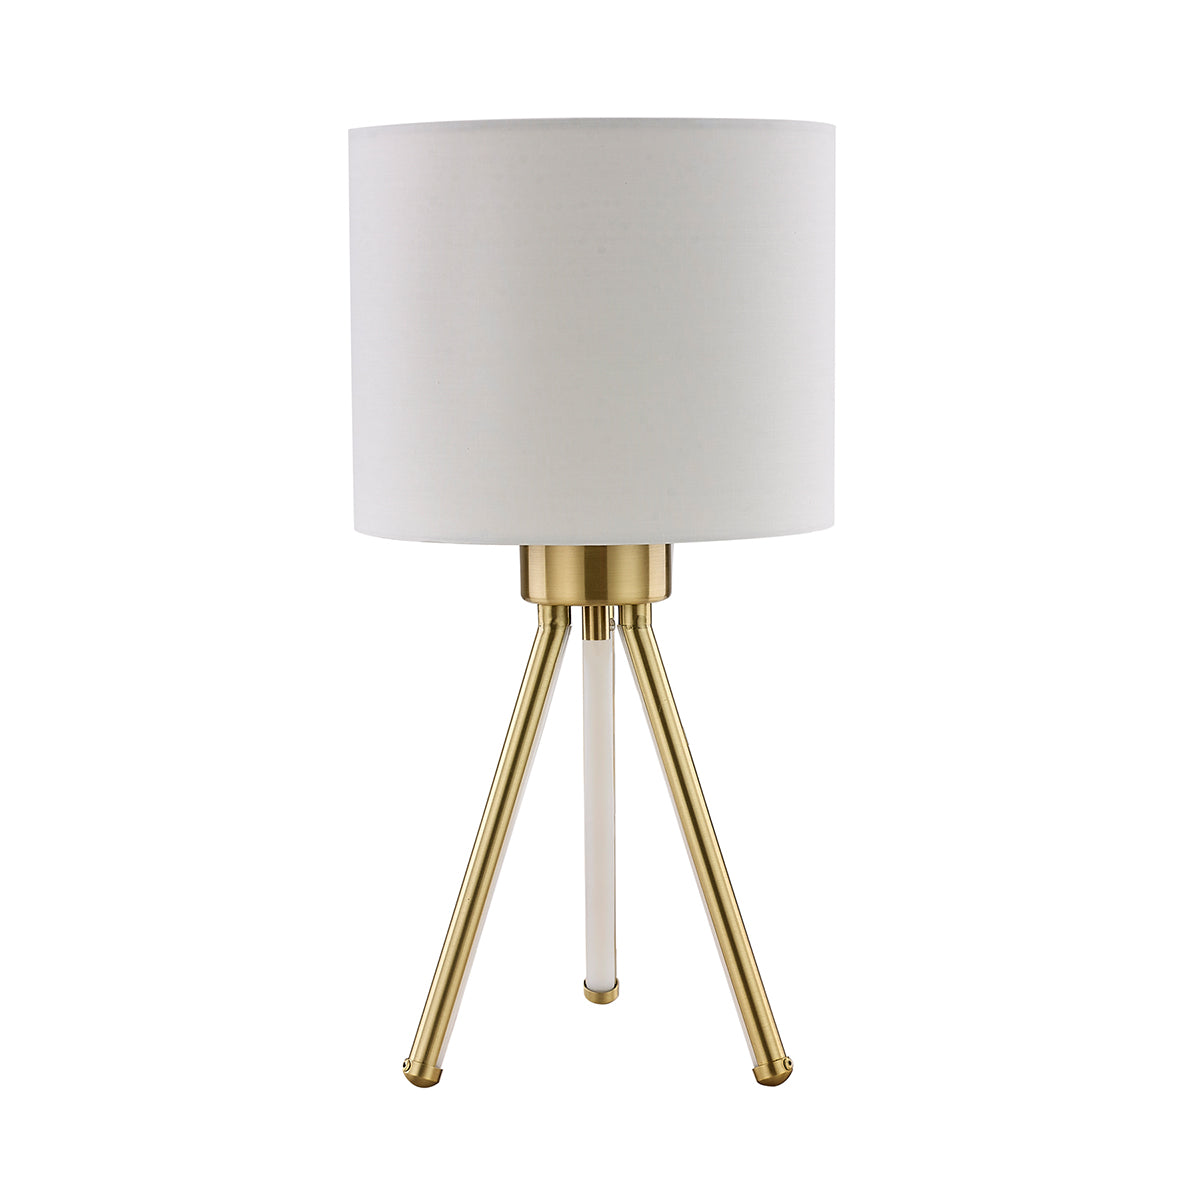 Sylive Table Lamp - Brass